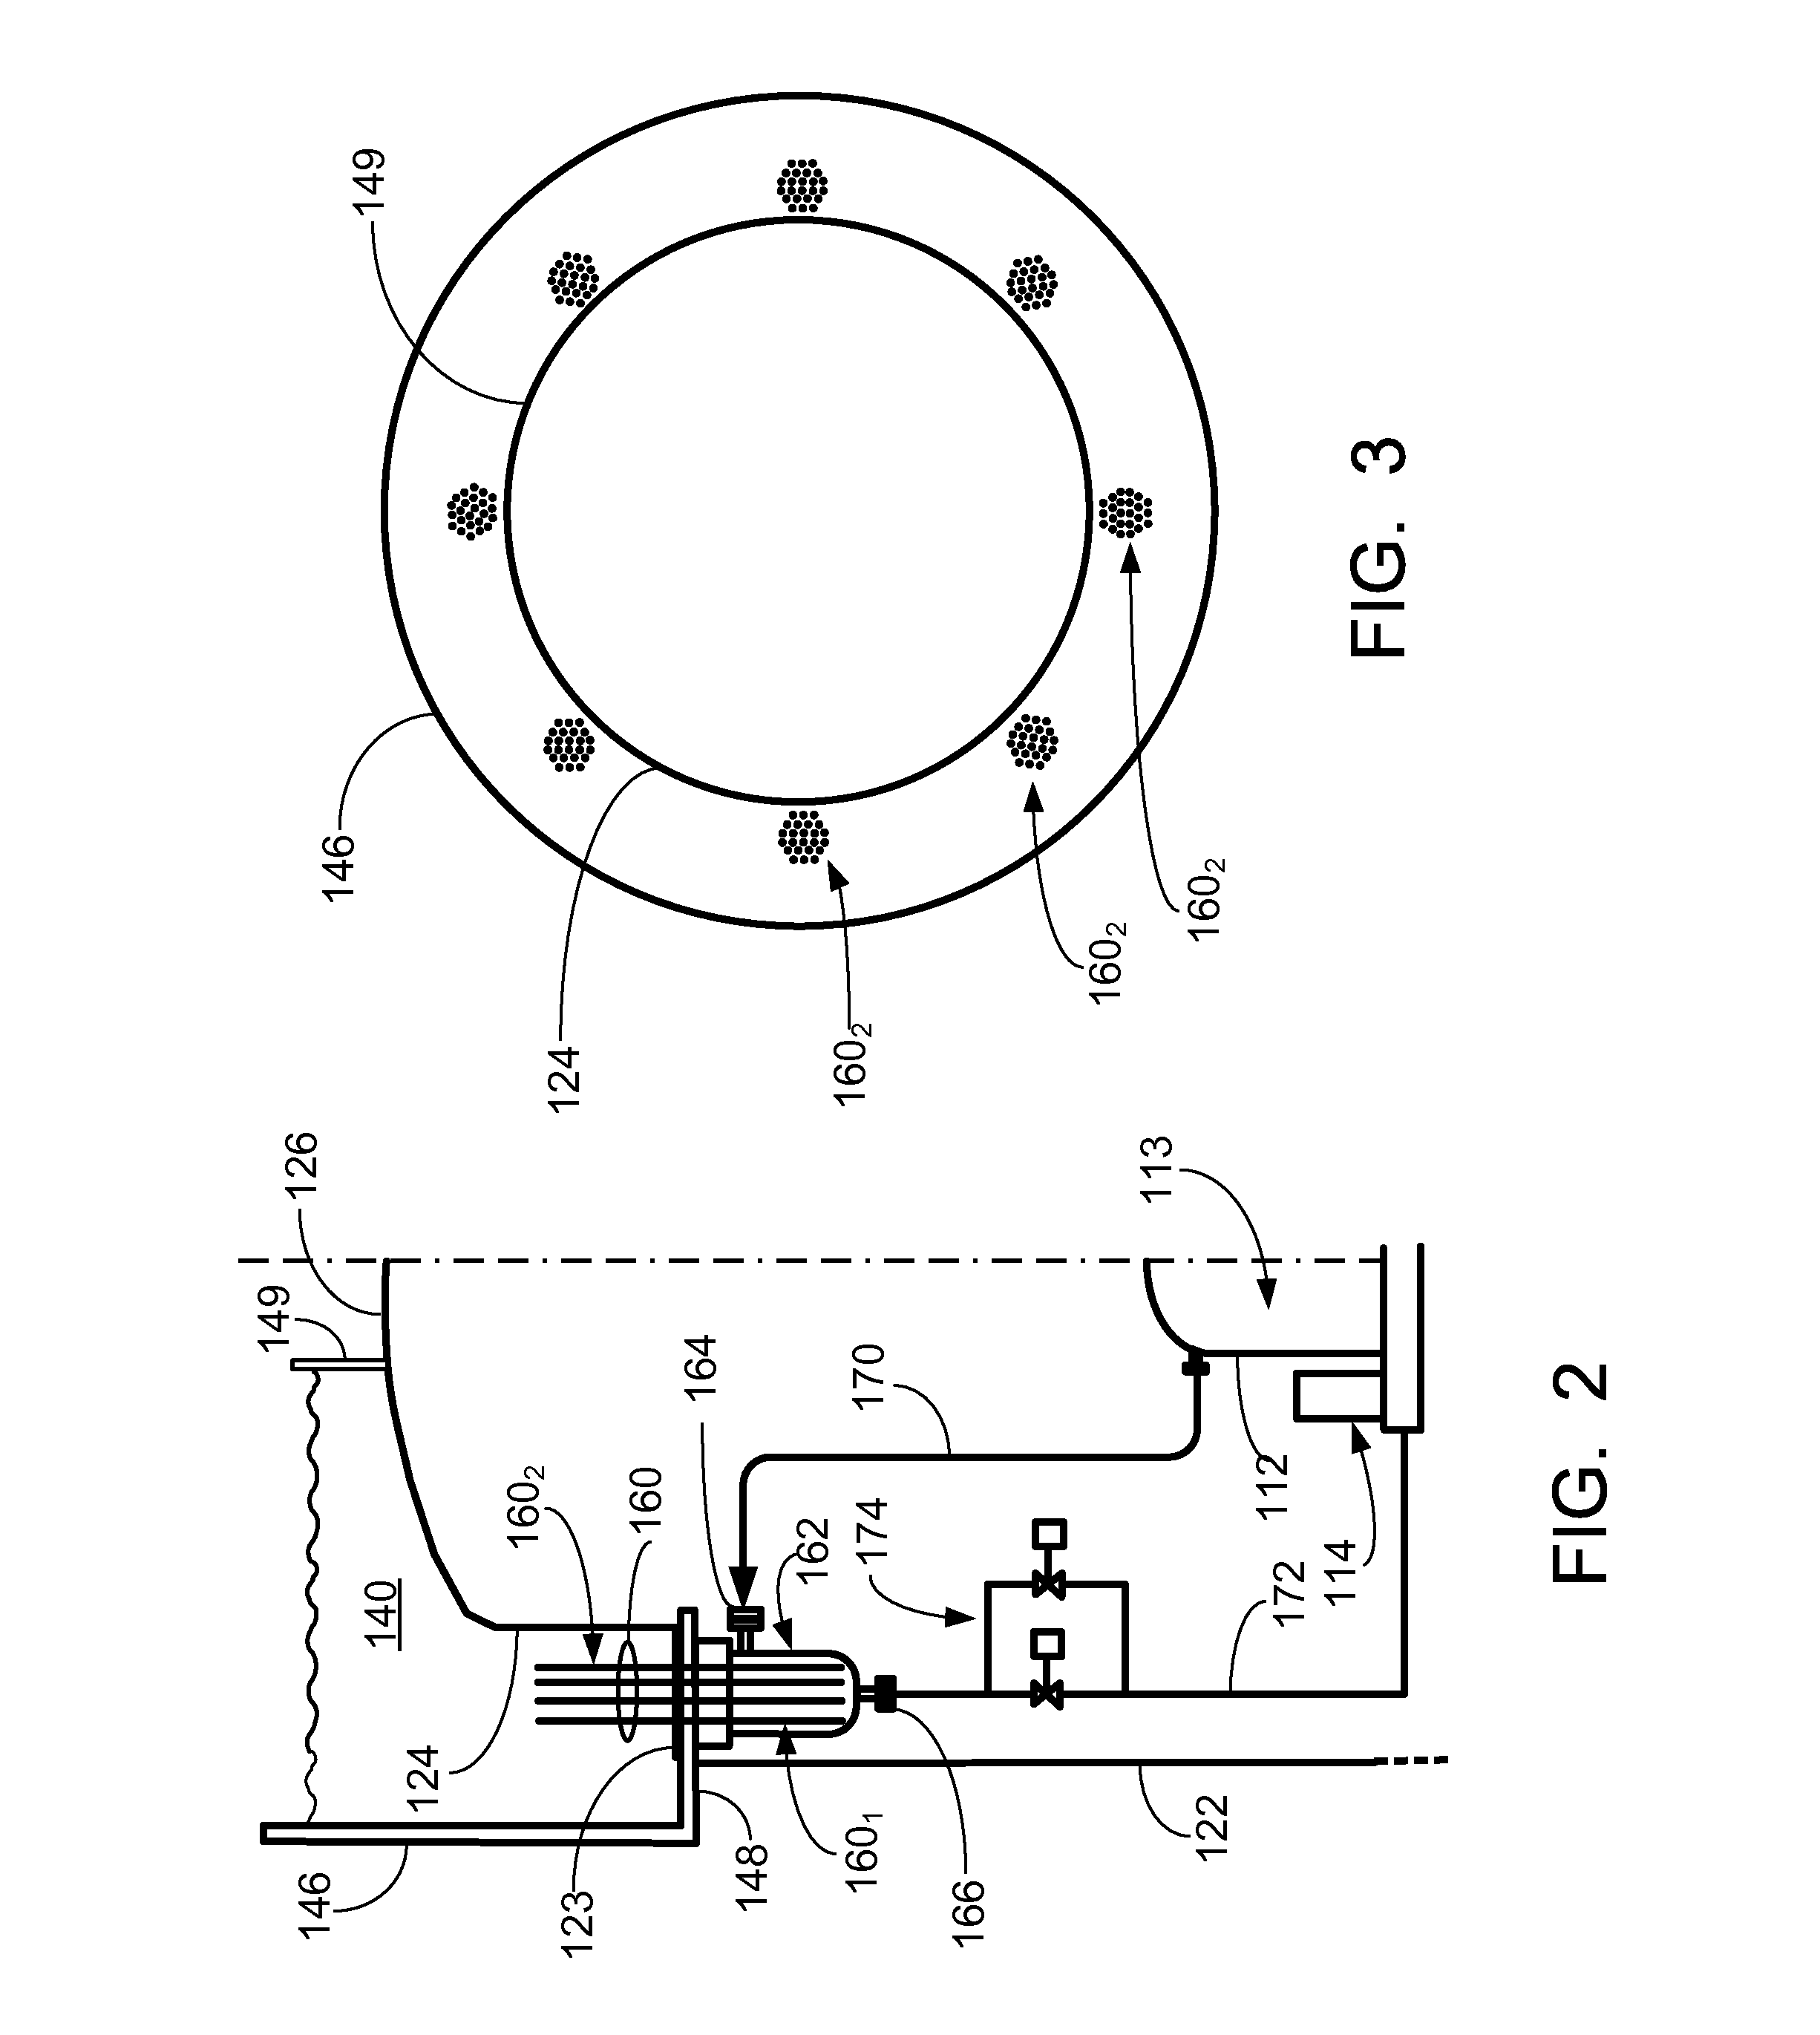 Emergency core cooling system (ECCS) for nuclear reactor employing closed heat transfer pathways